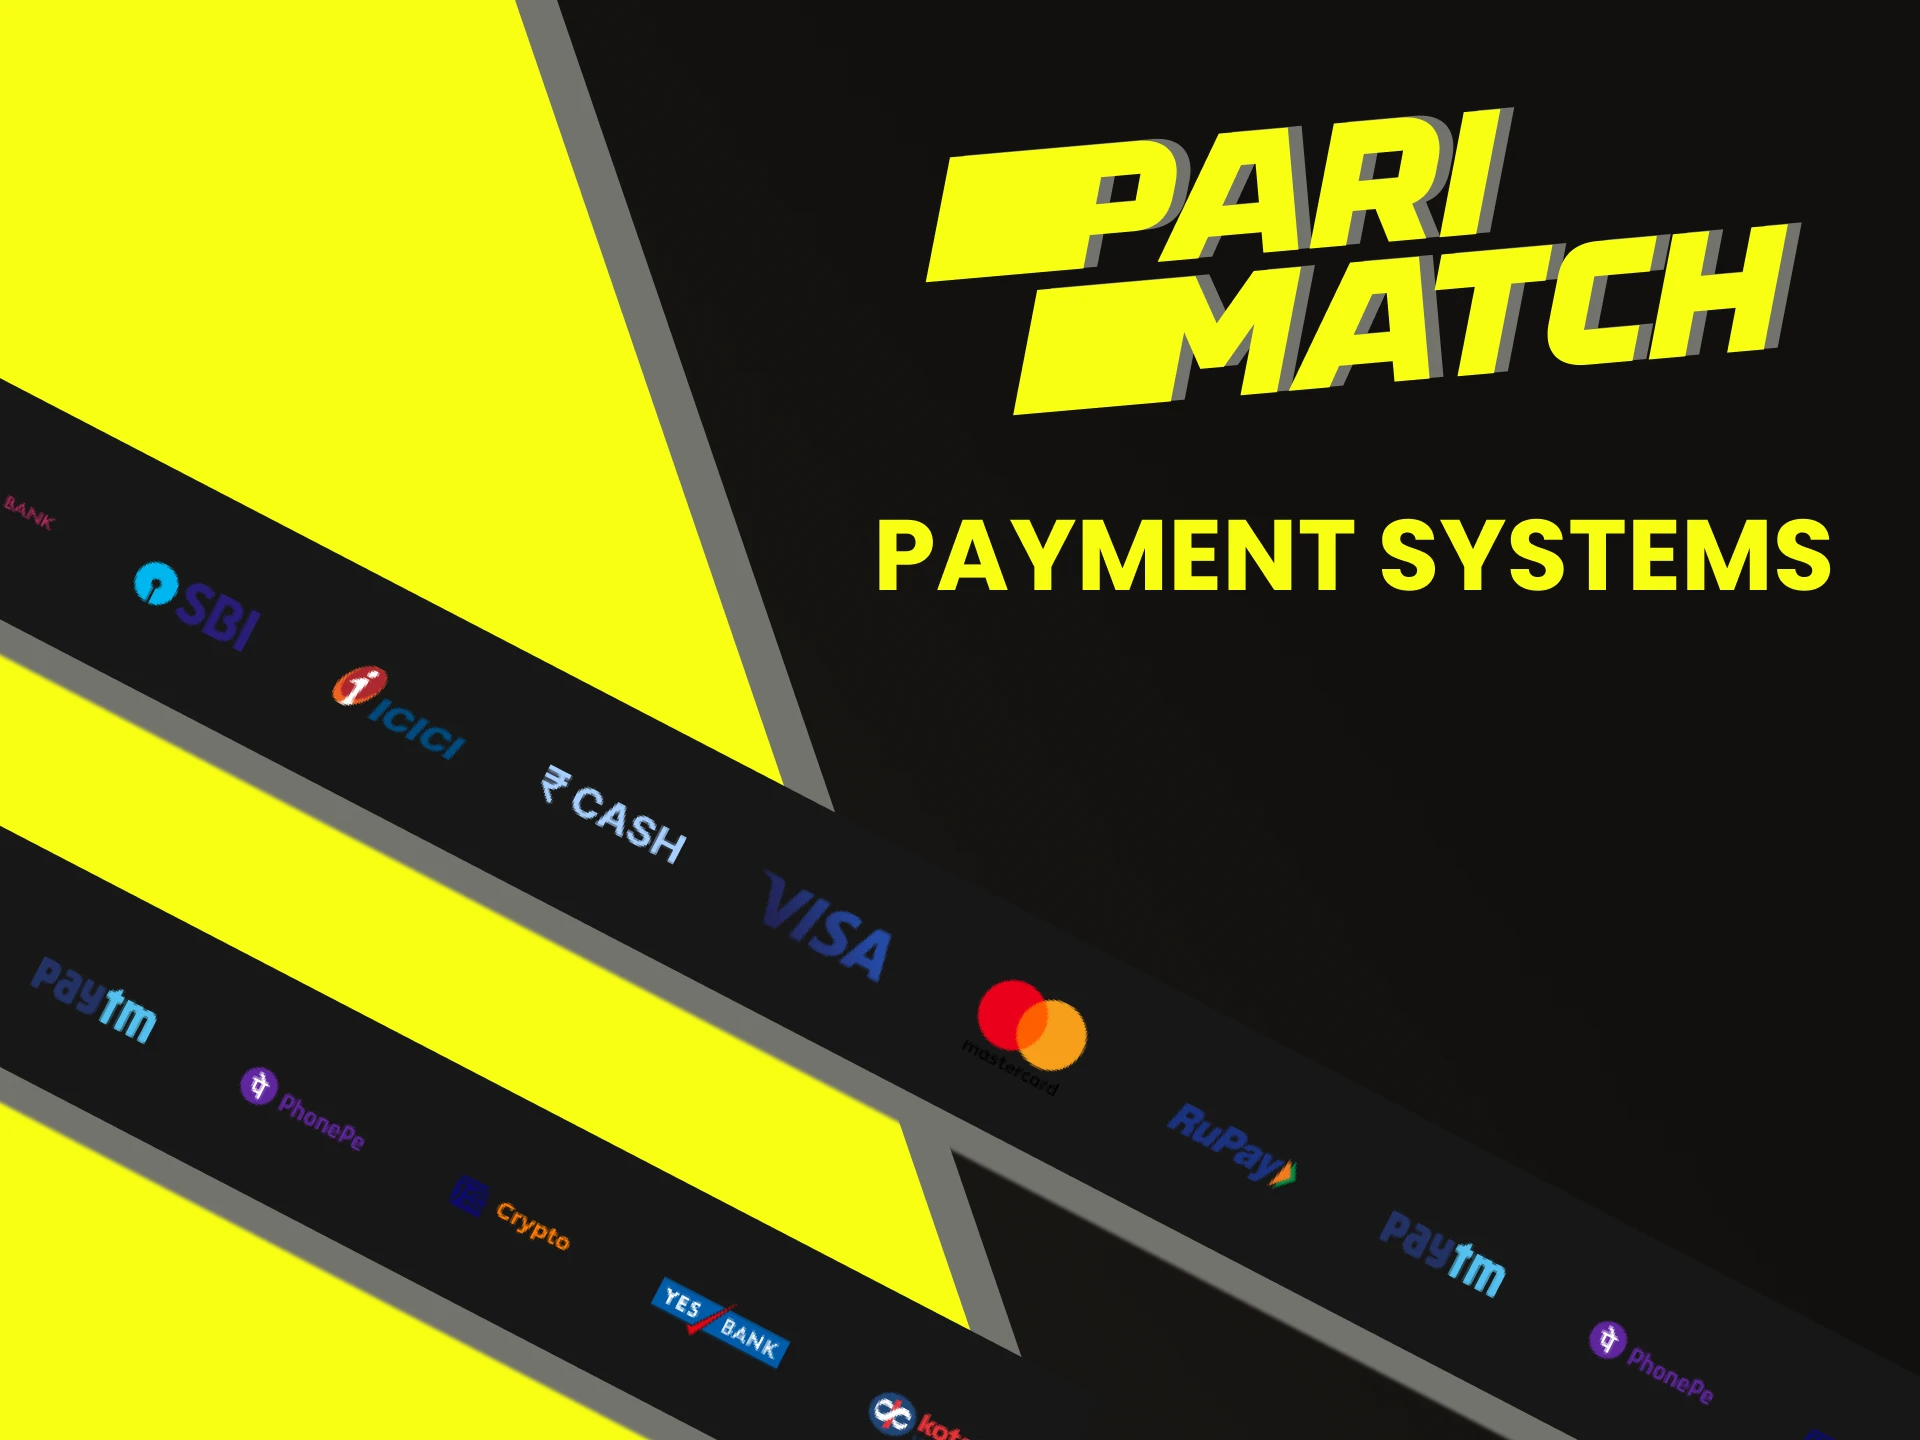 We will tell you what payment methods are available on Parimatch.